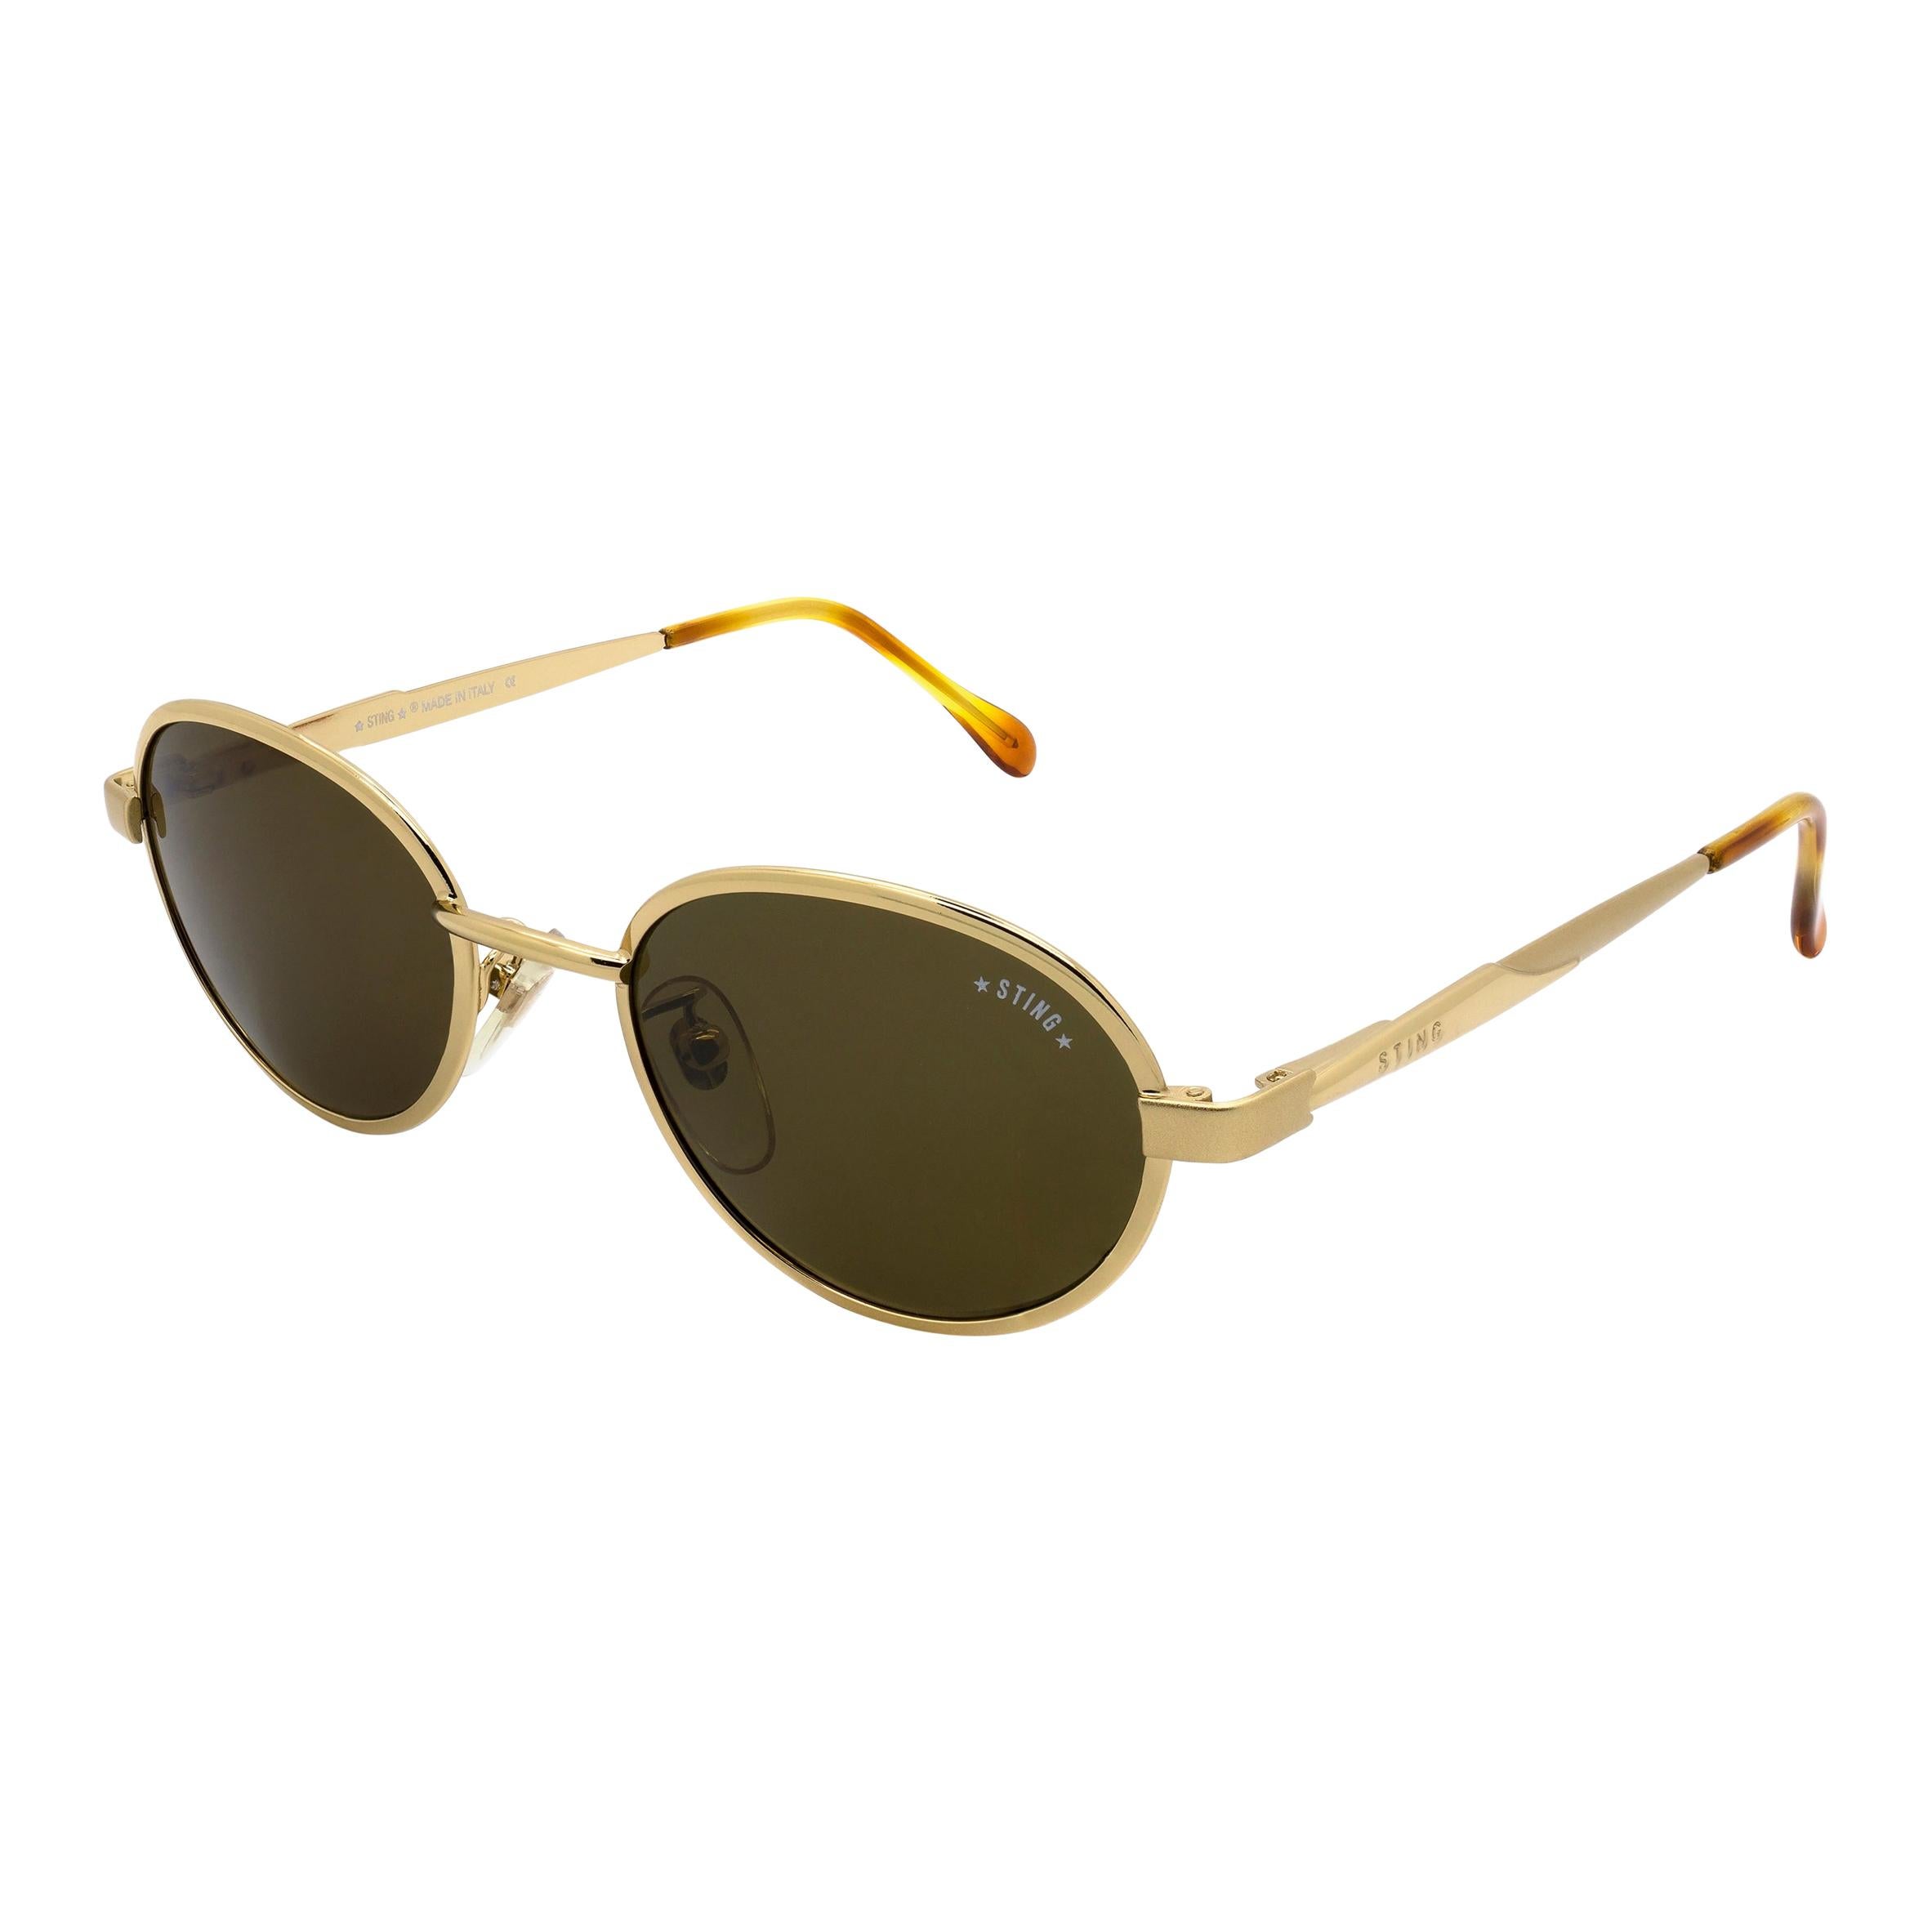 Round gold sunglasses by Sting, Italy  For Sale